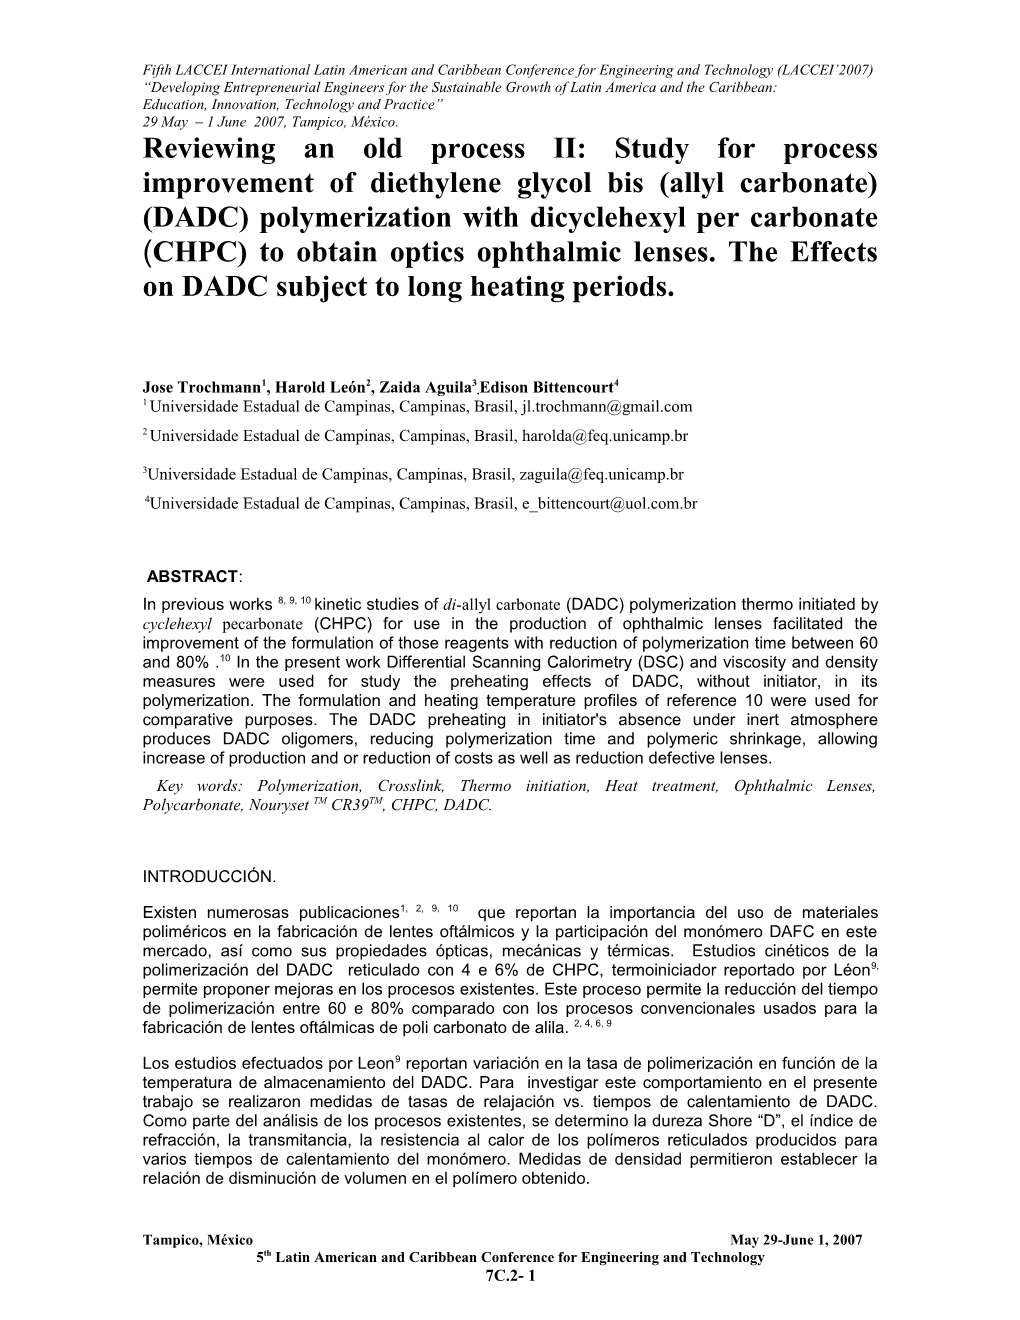 Revewing an Old Process II: Kinetic Study for Process Improvmente of Diethylene Glycol